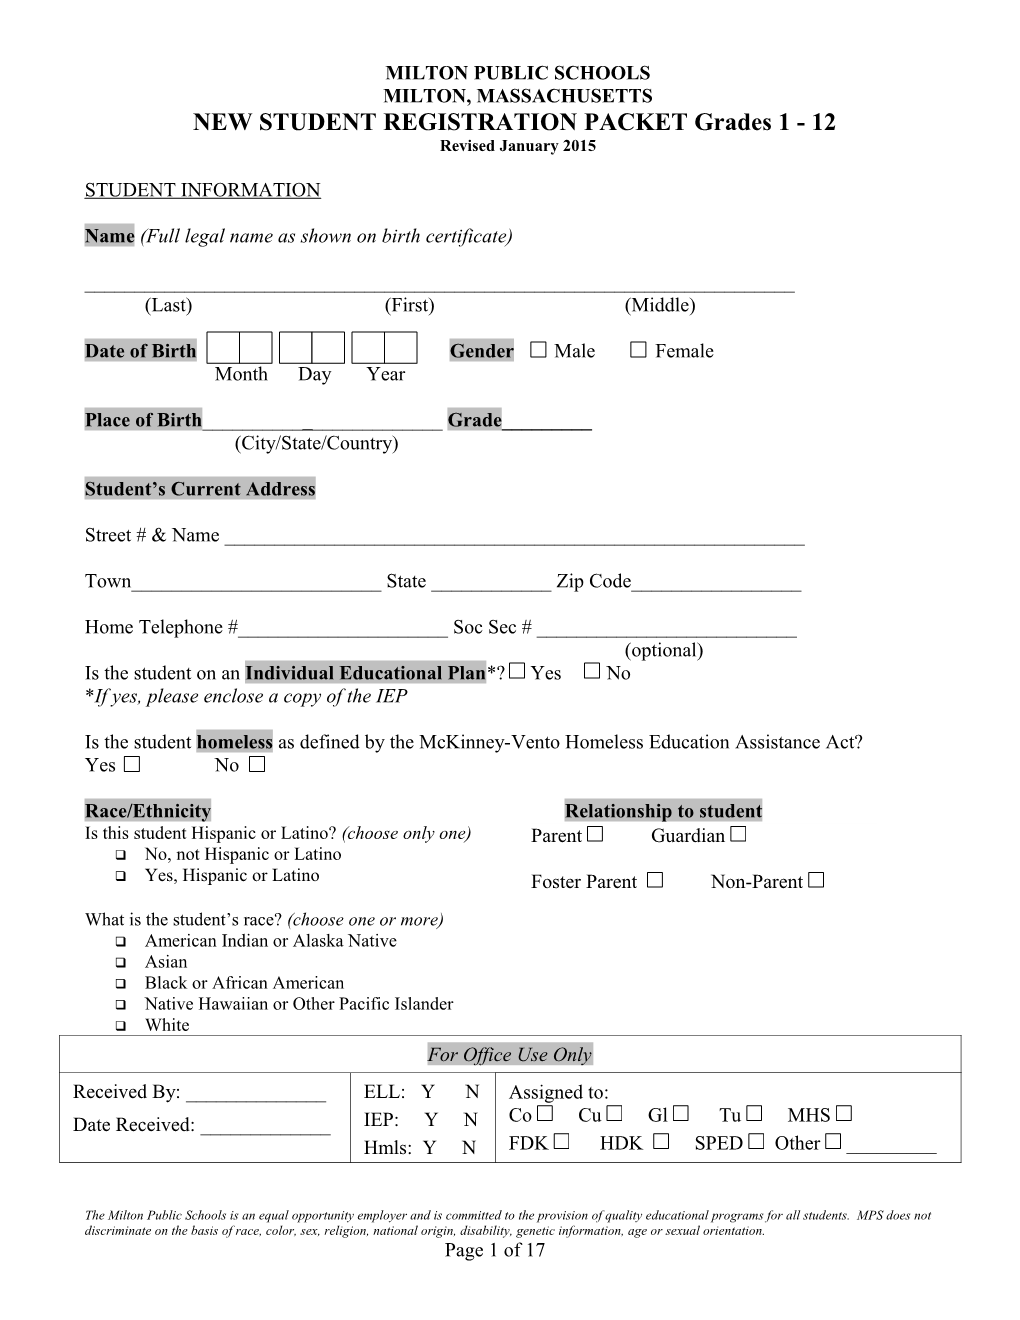 New Student Registration Packet s1